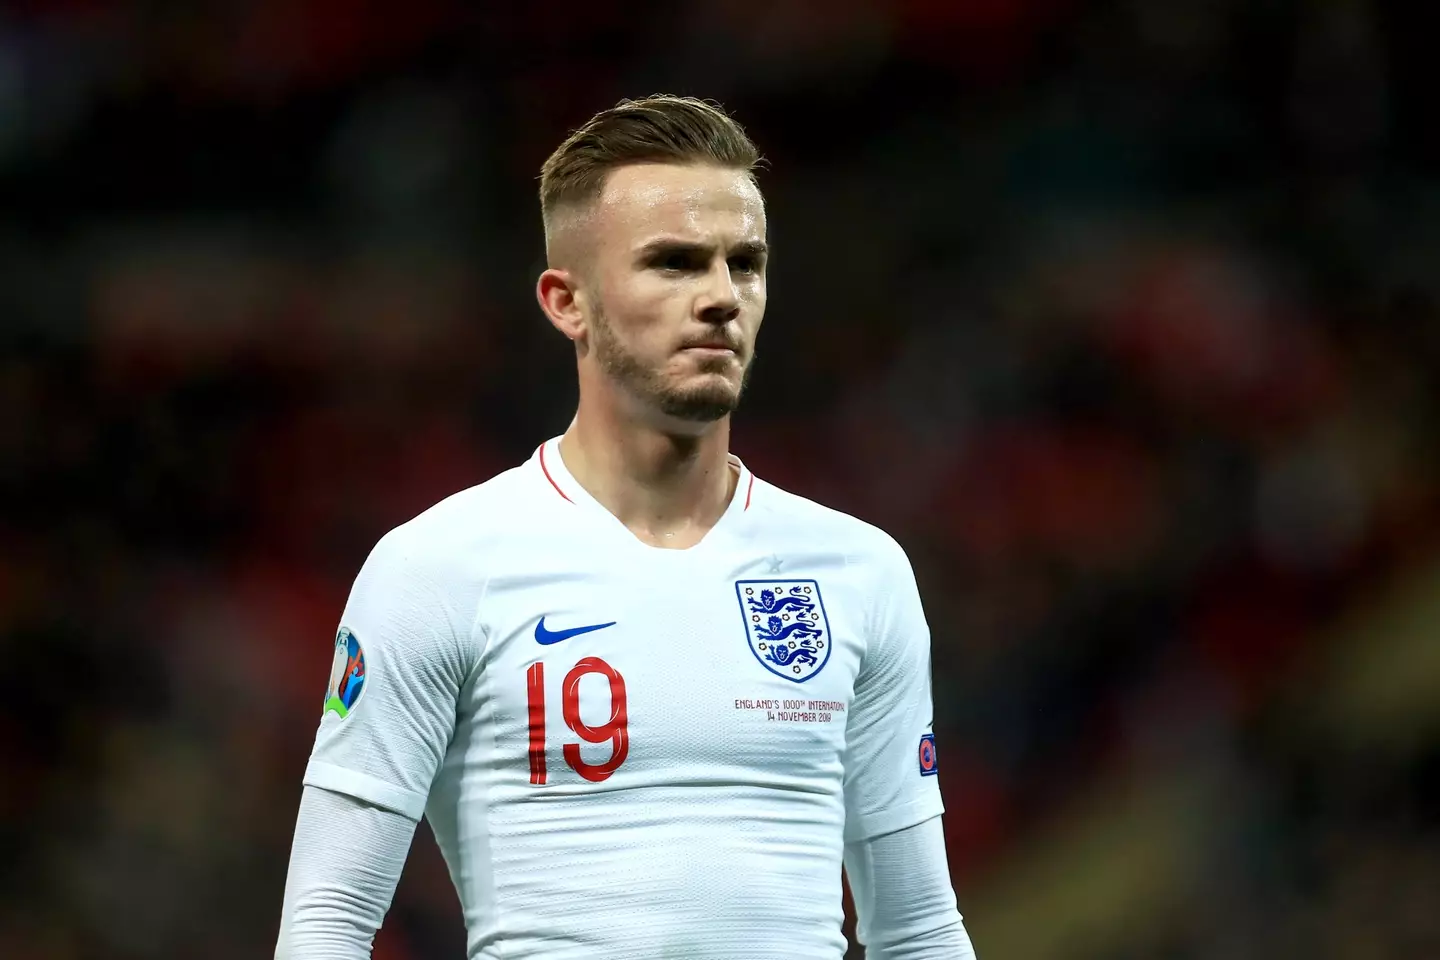 Maddison hasn't played for England since his one appearance in 2019. Image: Alamy